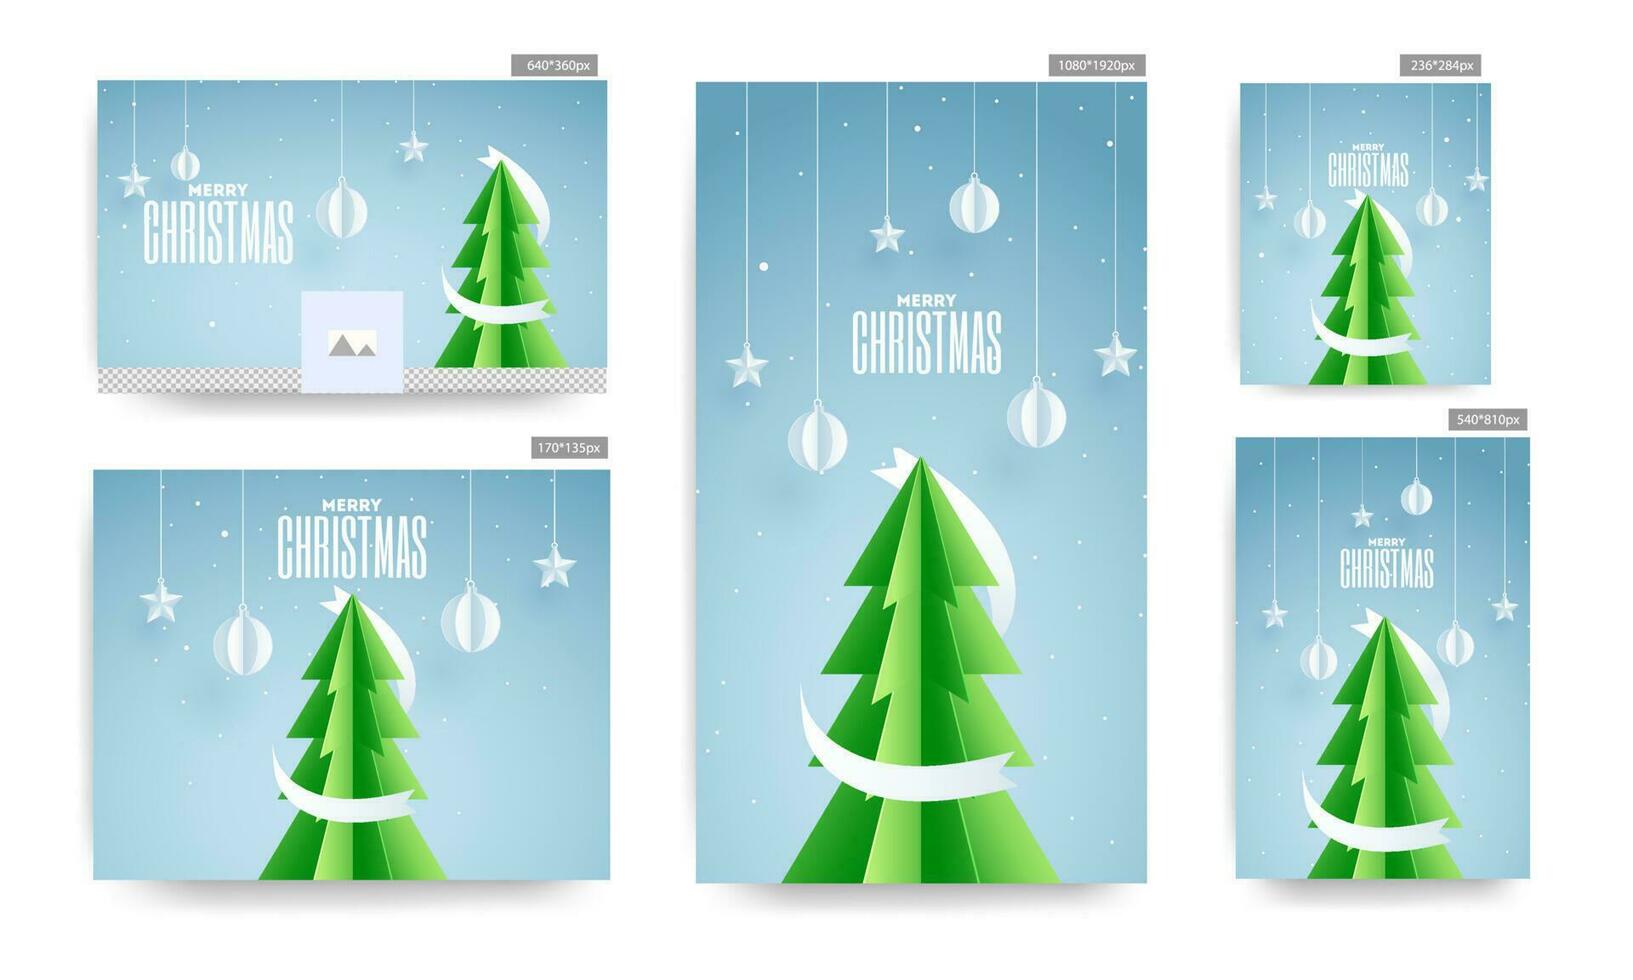 Social Media poster and template design set with paper cut xmas tree, hanging baubles and stars decorated on blue background for Merry Christmas celebration. vector